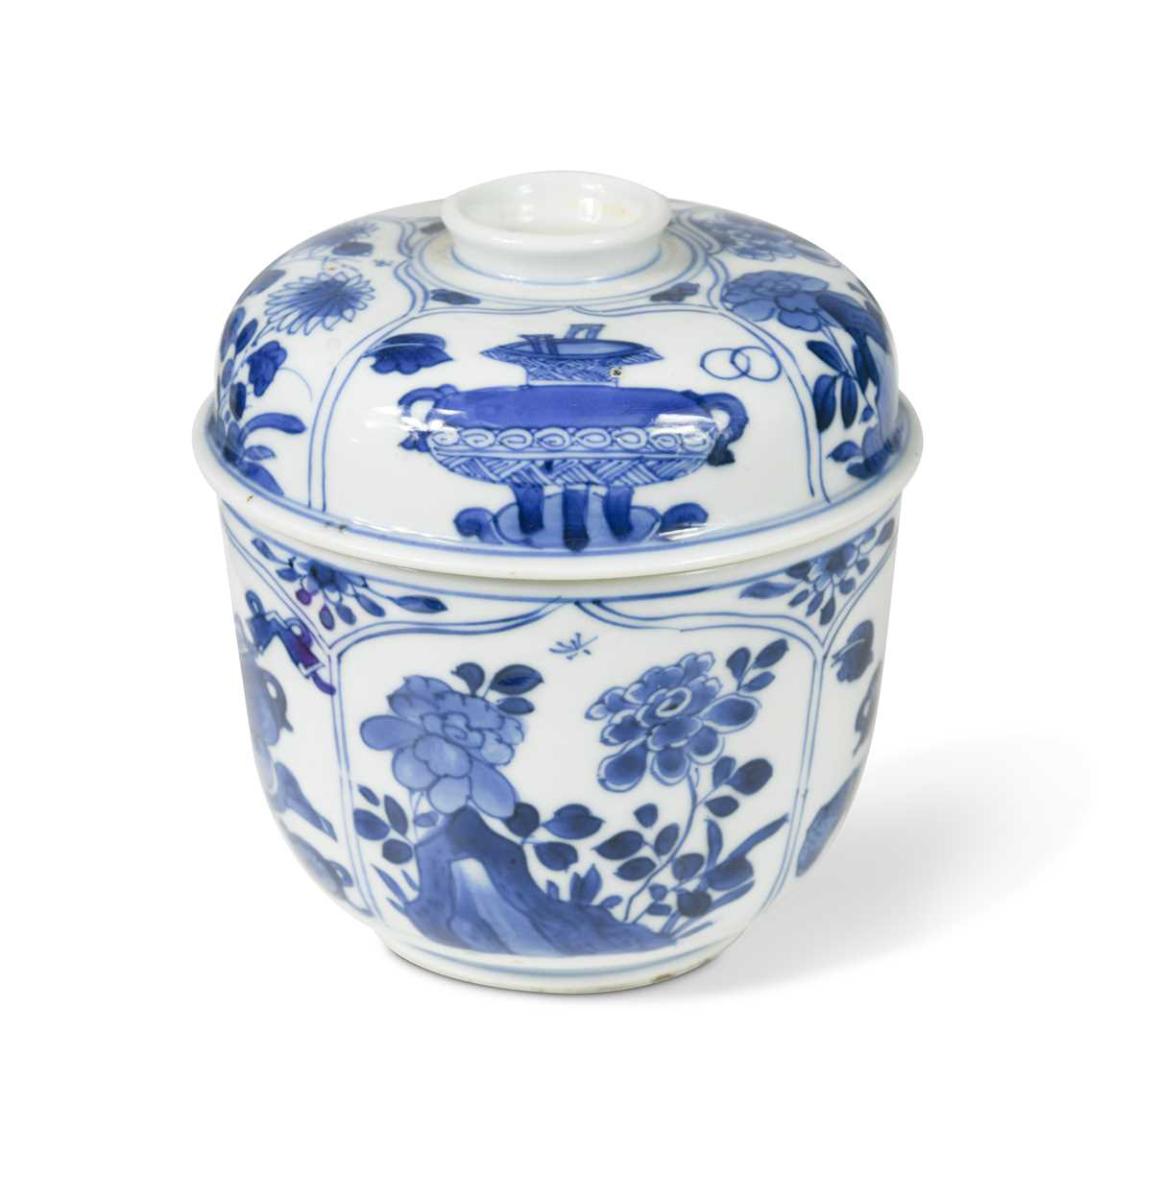 A Chinese Kangxi Blue and White Bowl and Cover, (1662 - 1722)